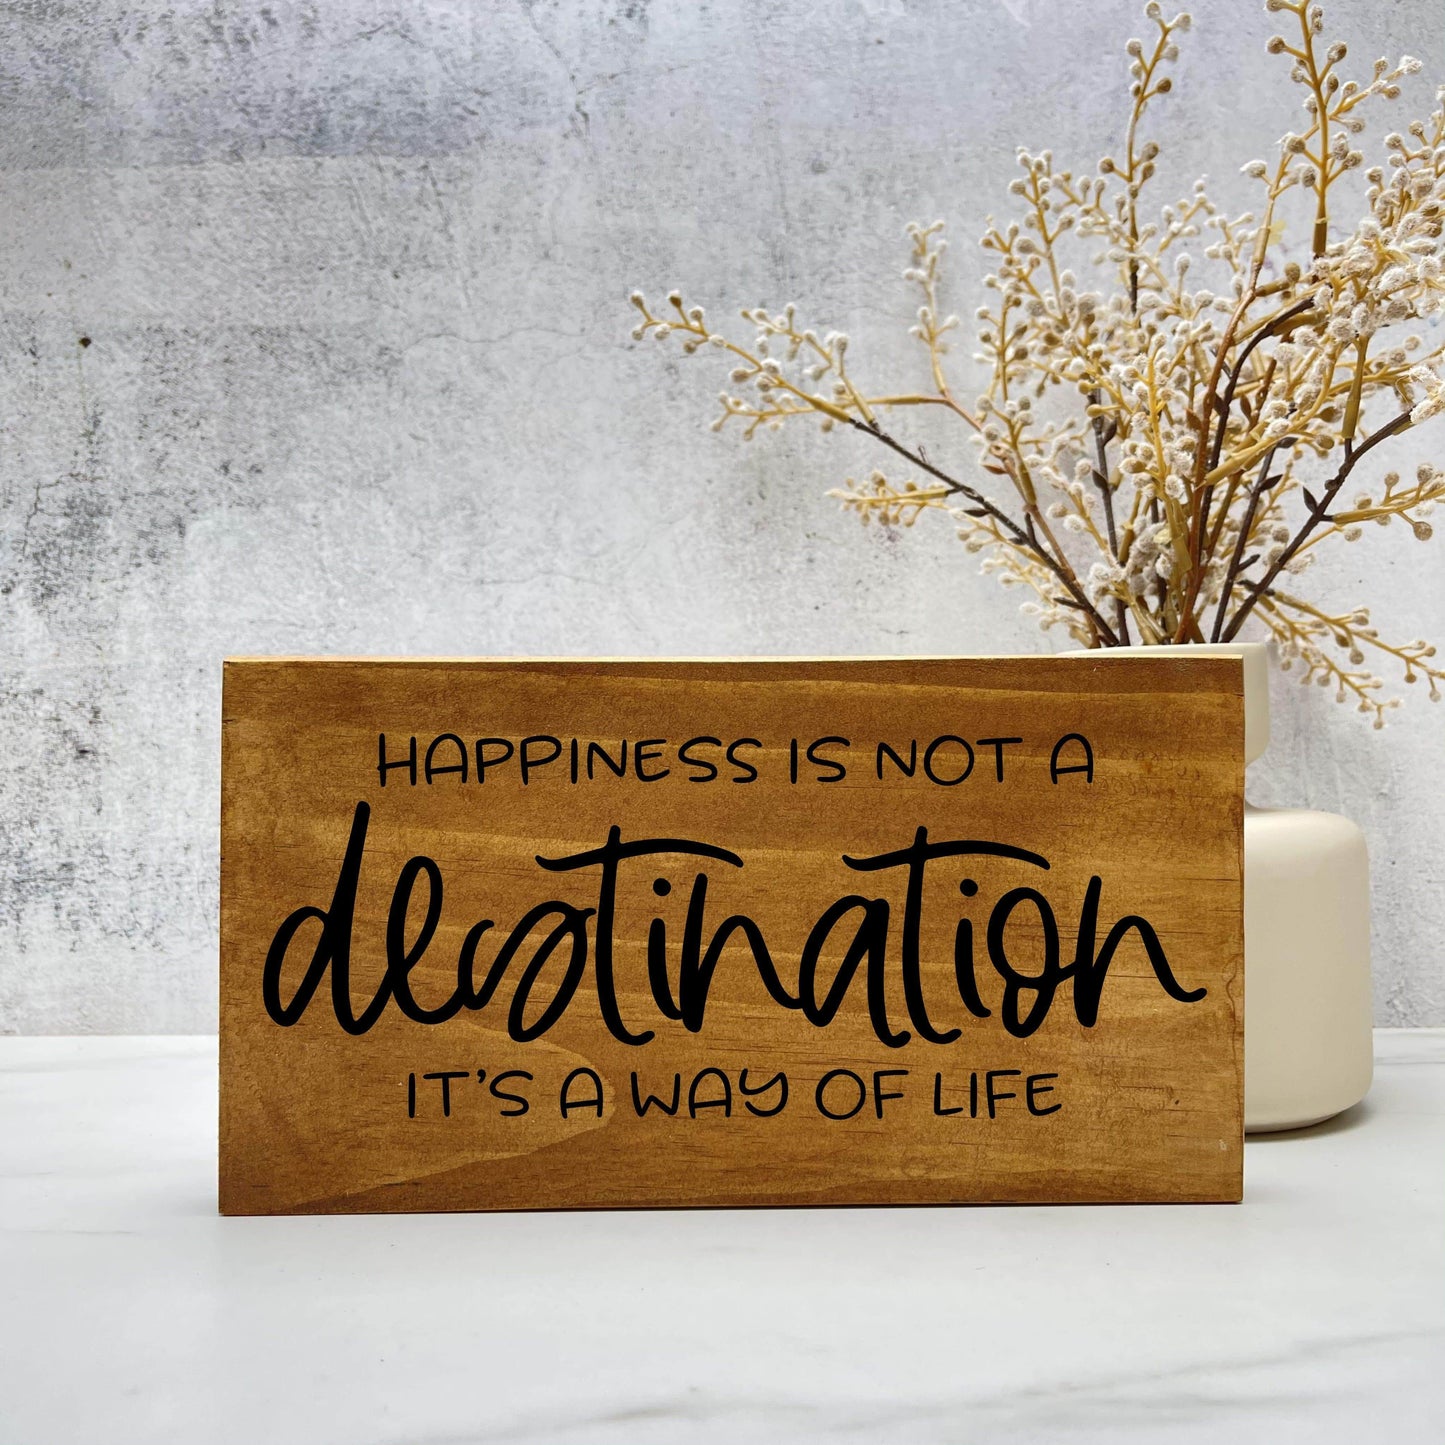 Happiness is not a Destination, But a way of Life wood sign, quote sign, rustic decor, home decor